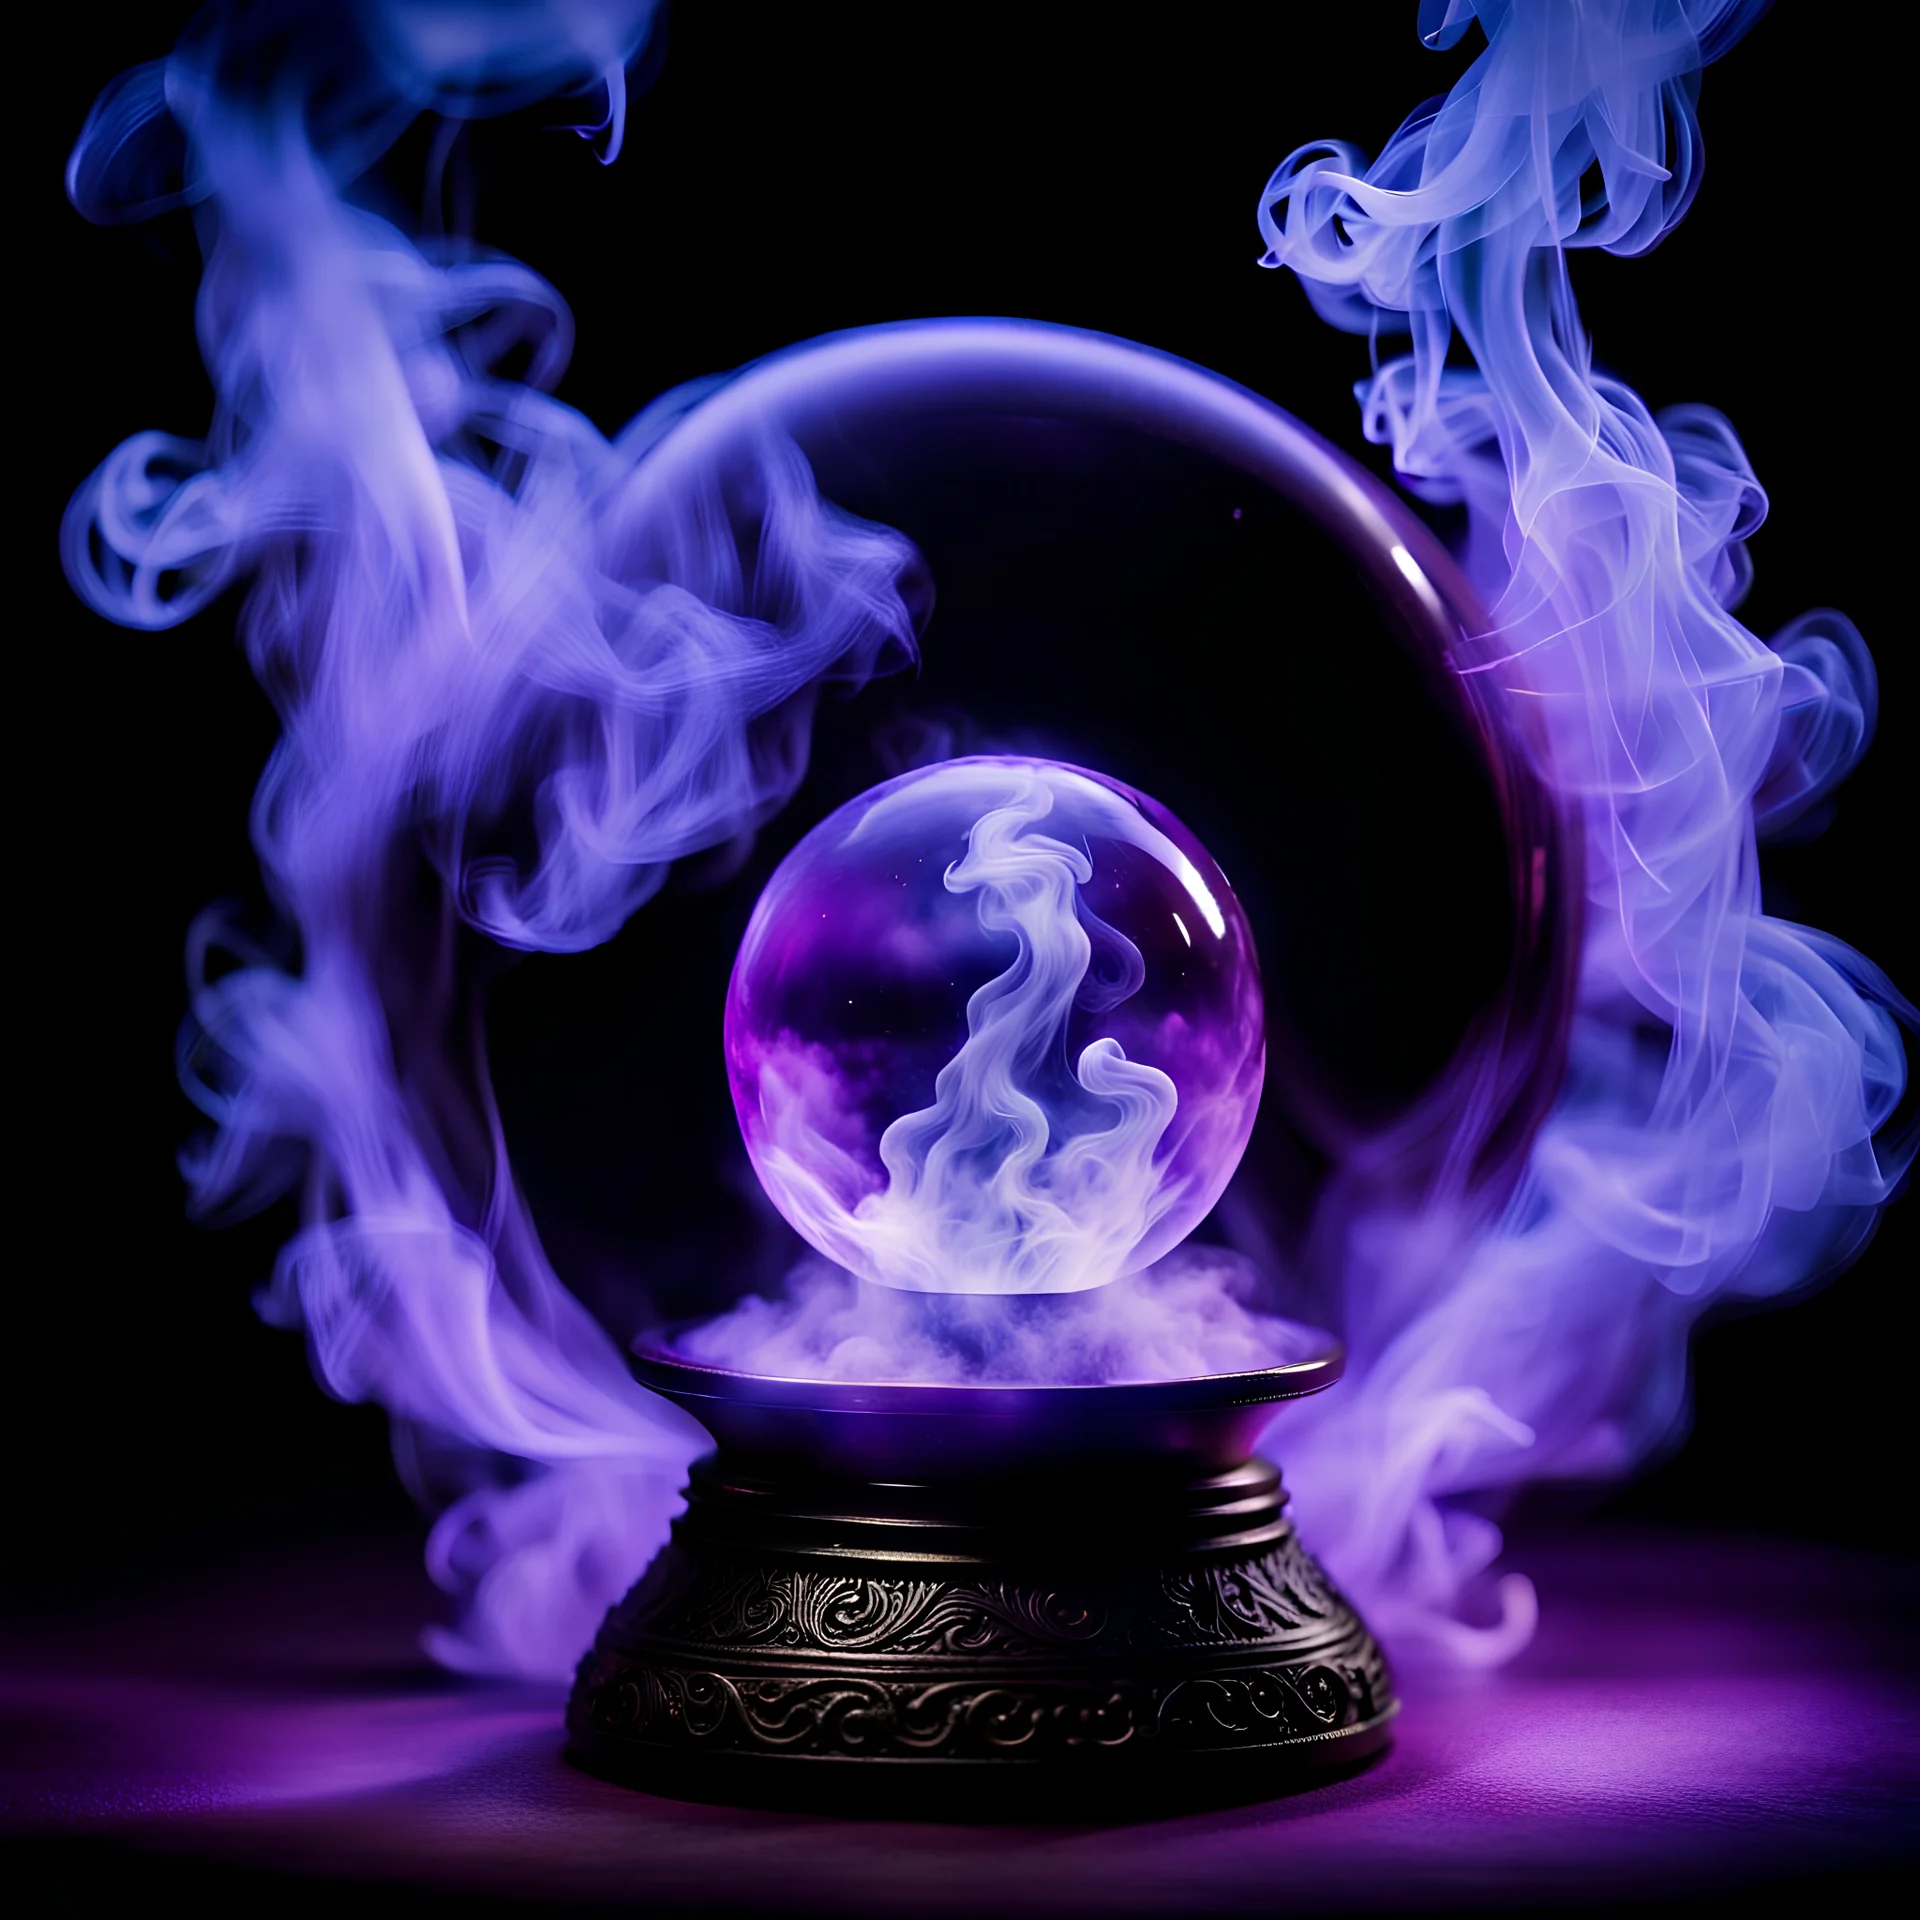 magical crystal ball, surrounded by smoke and sorcerous energy, purple lighting, black background